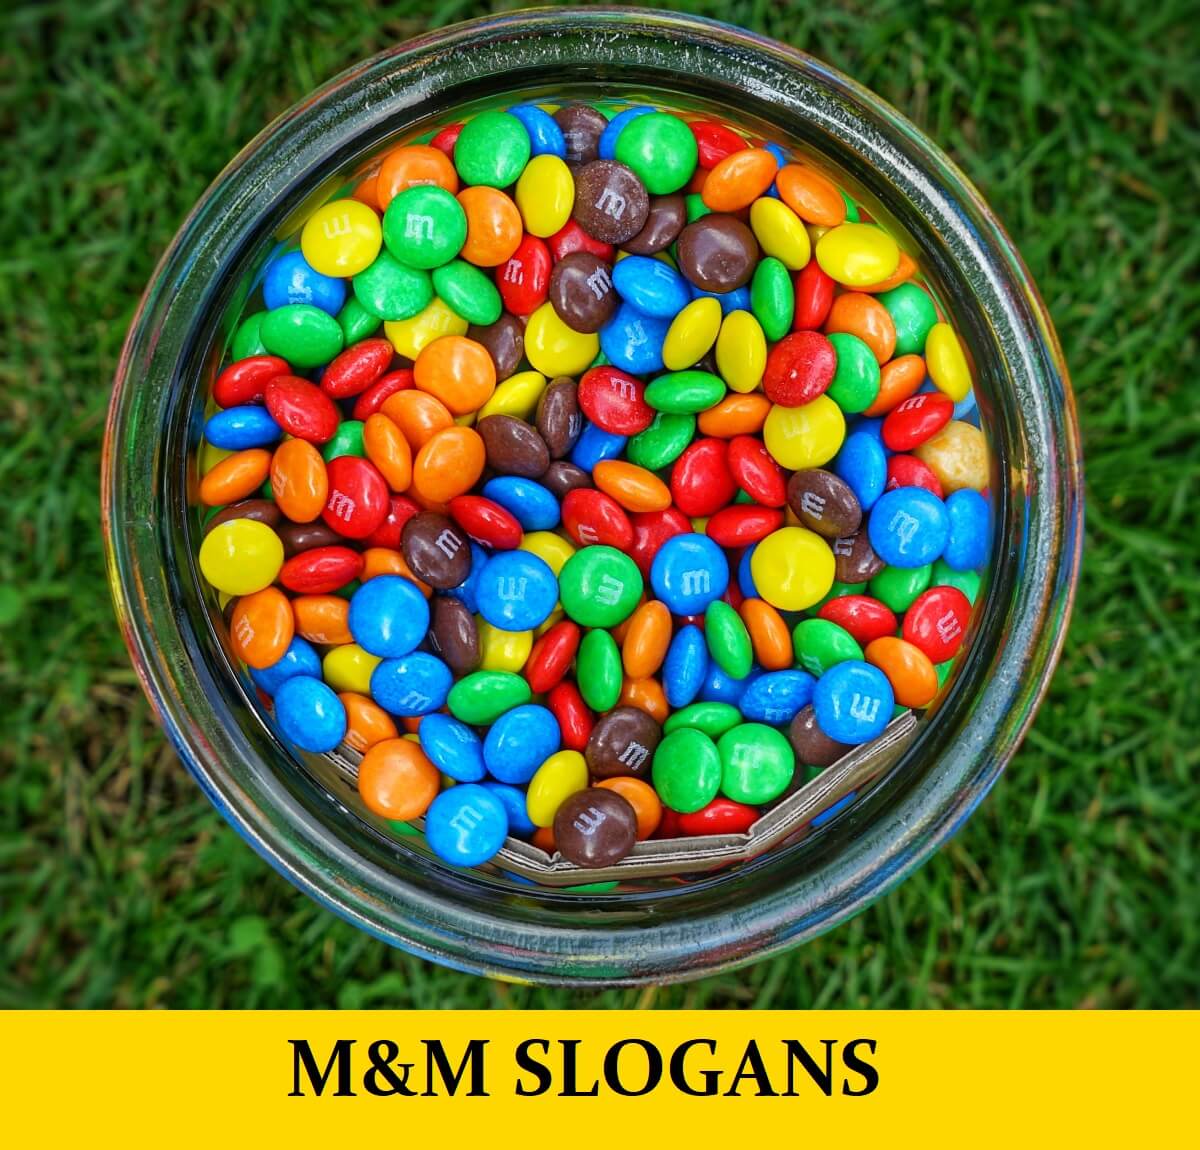 What's your best slogan for a single M&M? 😋 @mmschocolate